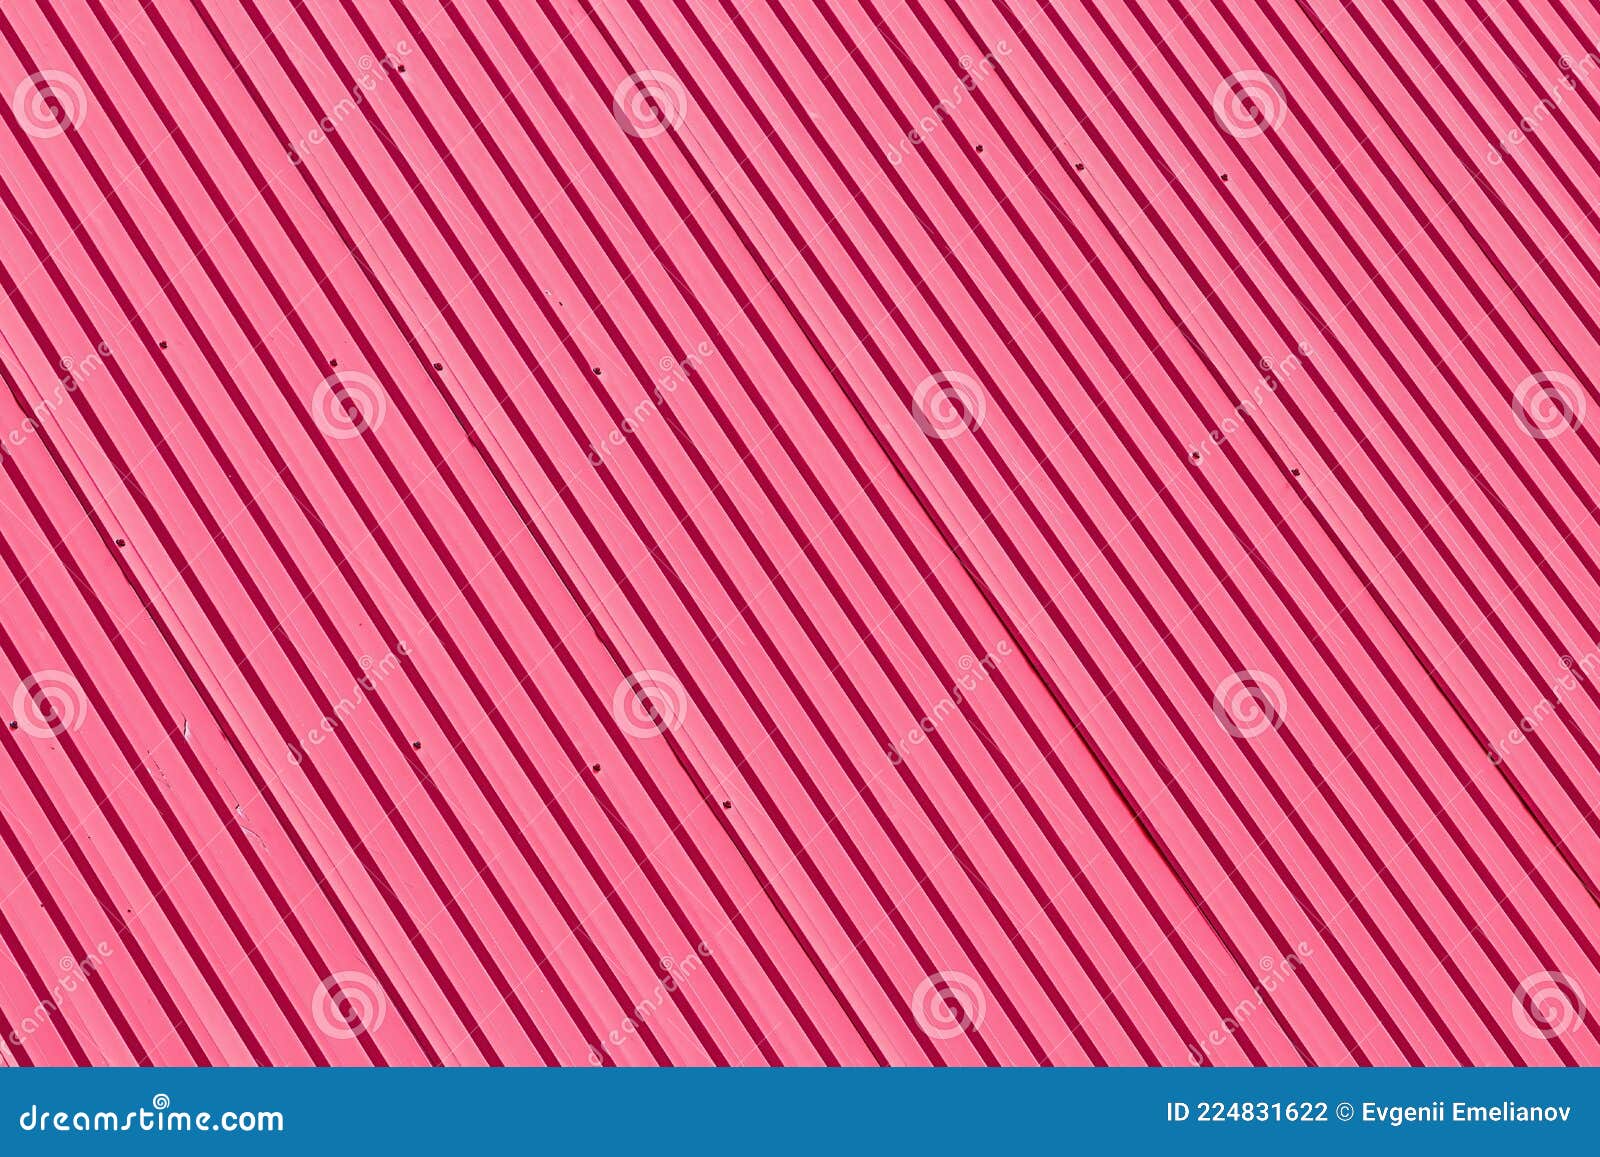 The Texture Of Red Metal Roof Covering Stock Photo Image Of House